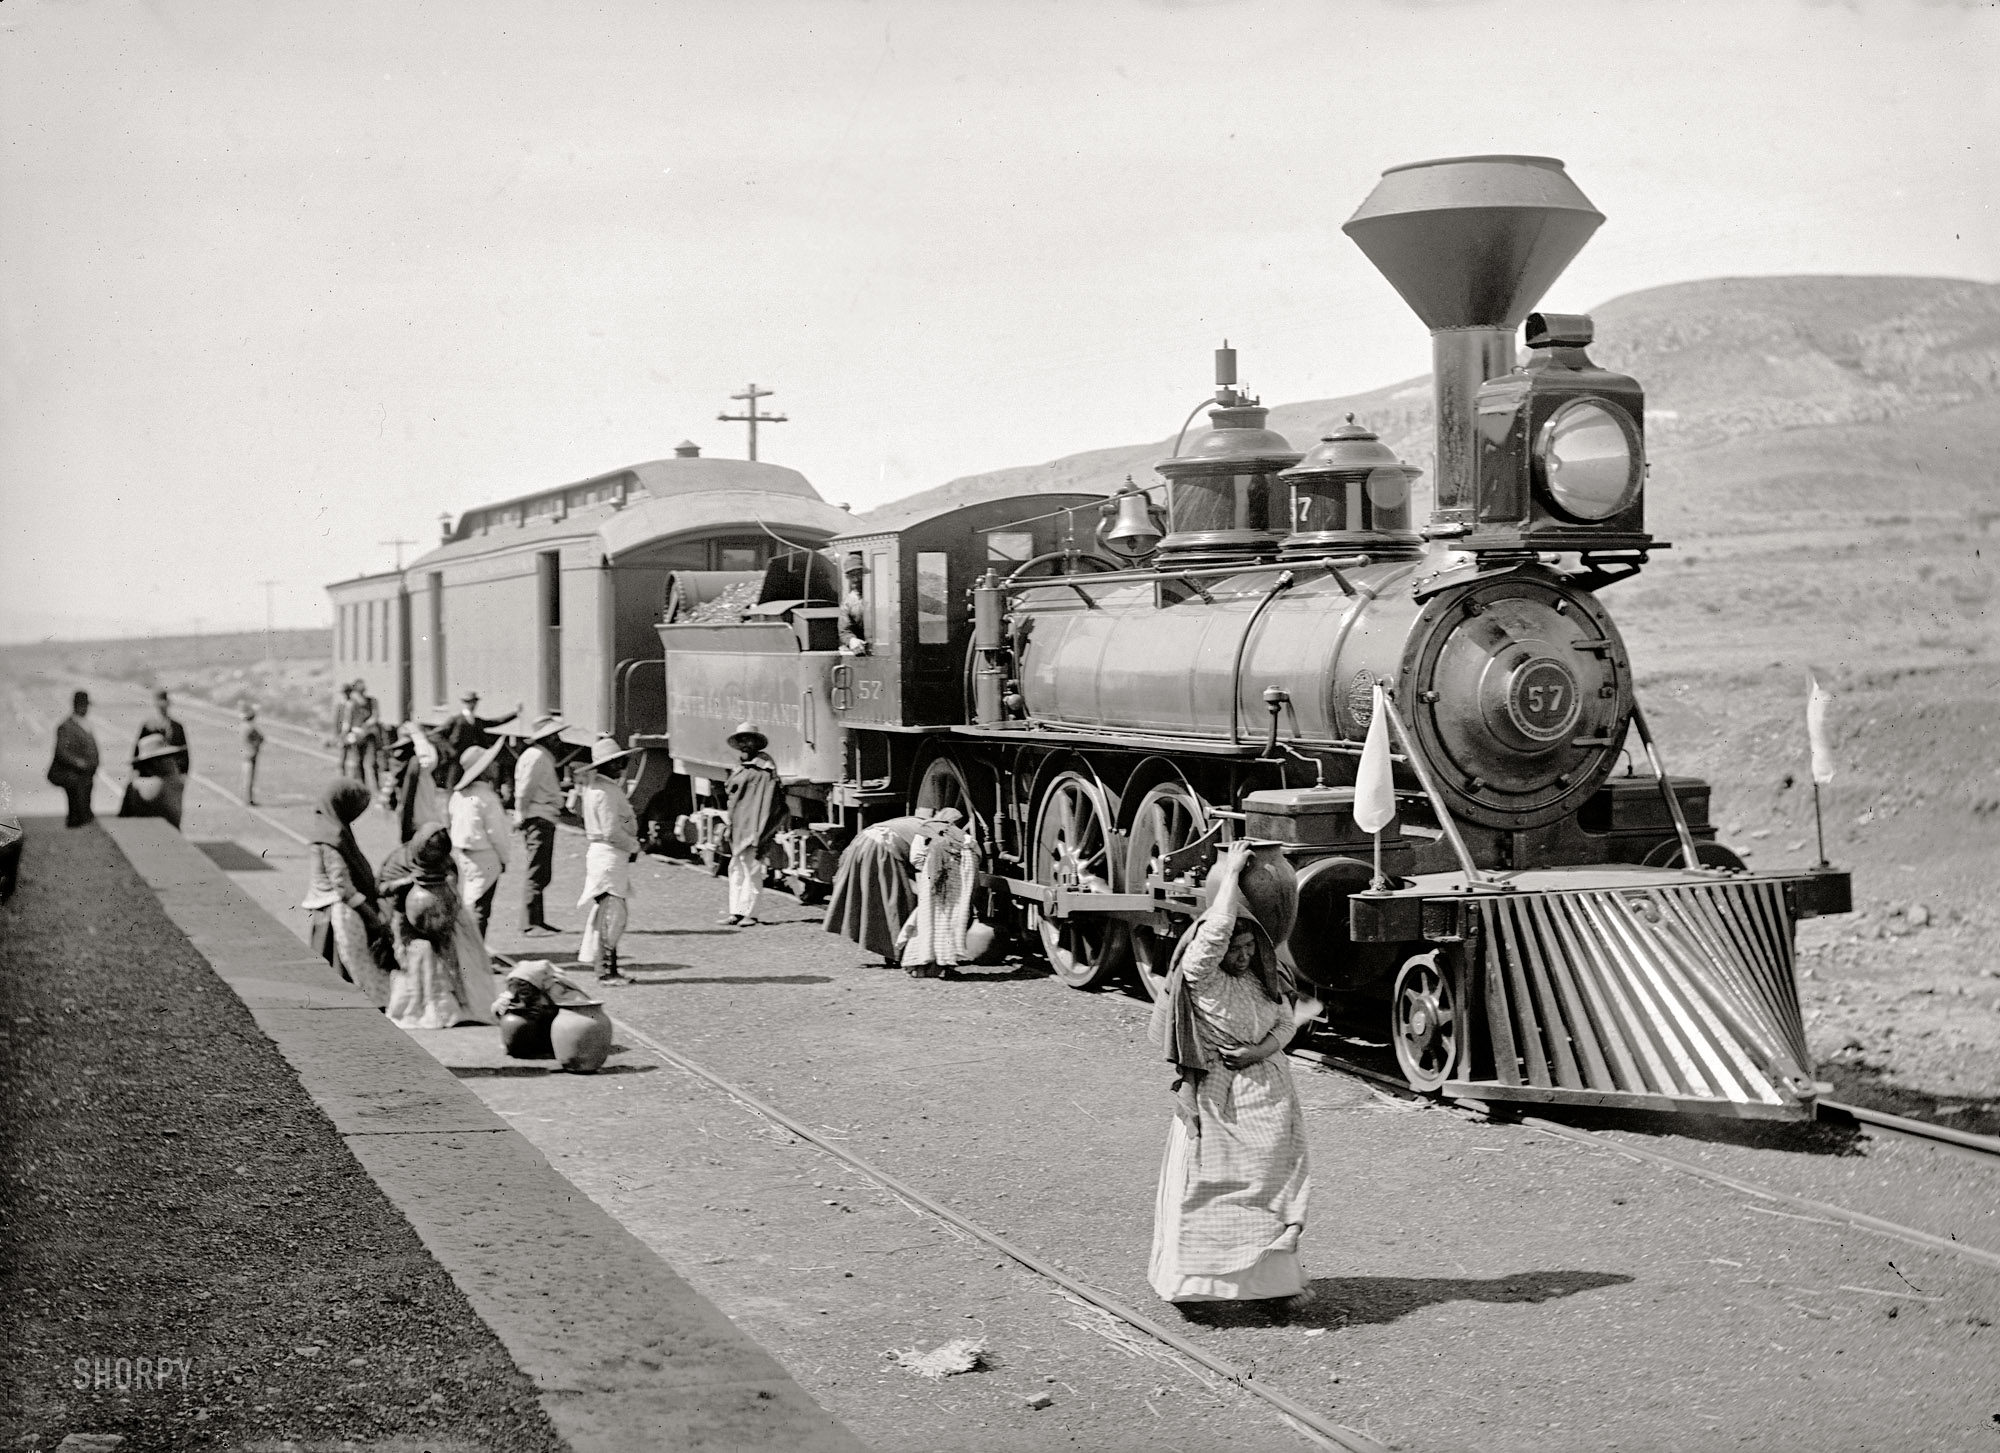 Circa 1890. "Mexican Central Railway train at station." Dry plate glass negative by William Henry Jackson. Detroit Publishing Co. View full size.